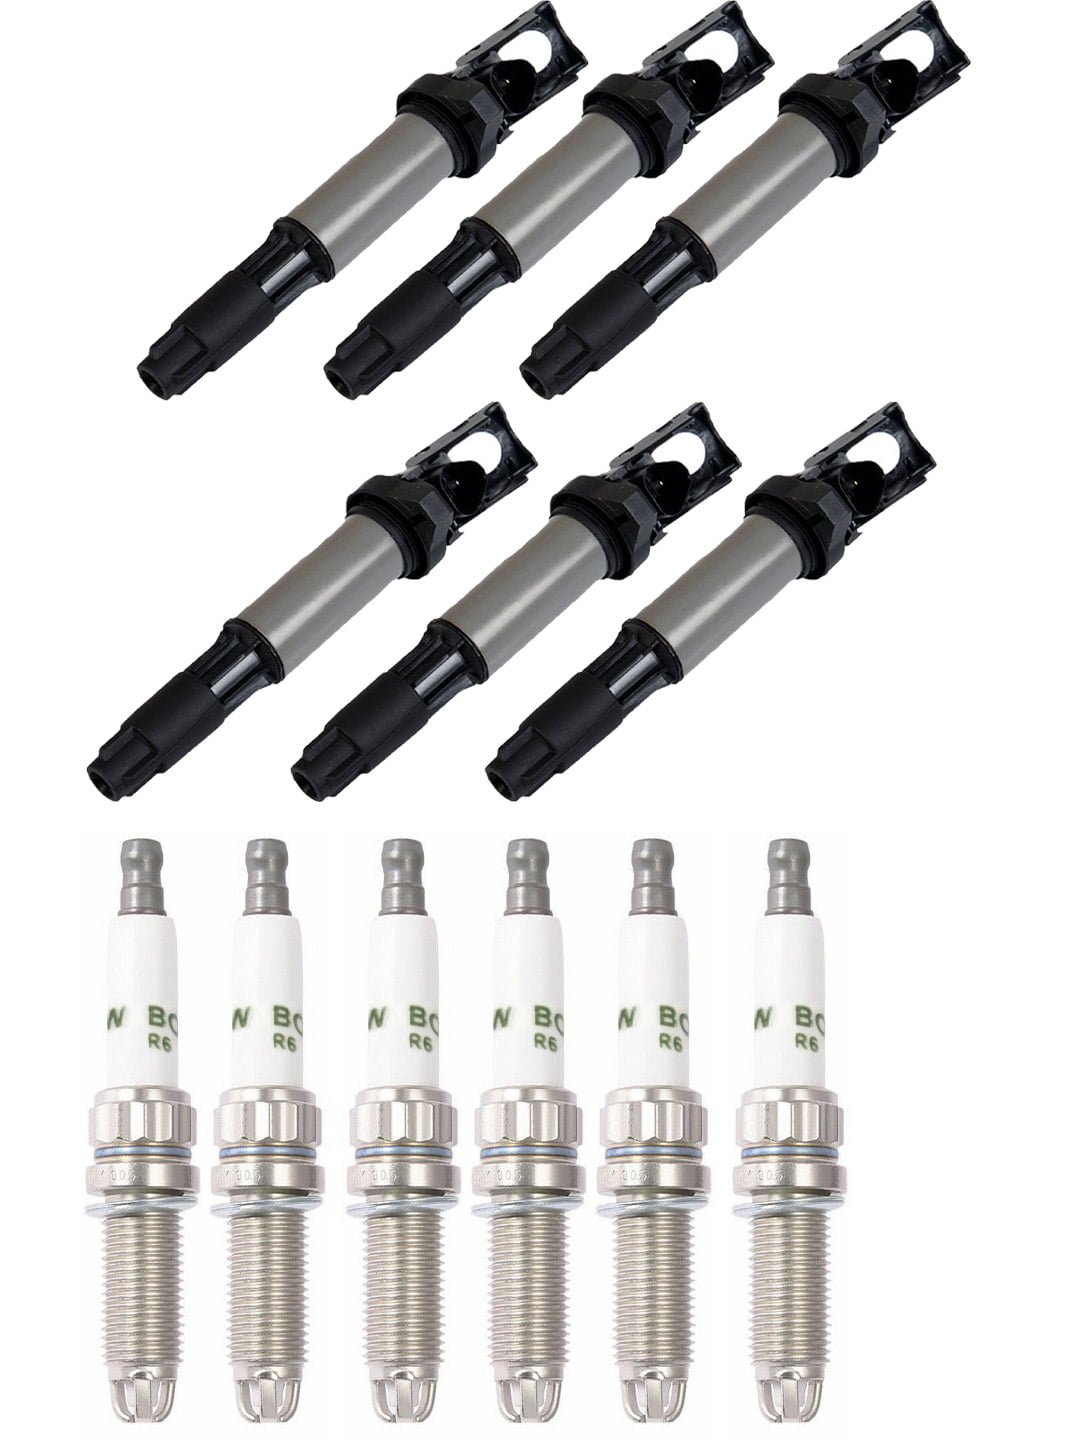 6 Set of High Engery UF553 Ignition Coils For Ford & More Bosch Spark Plugs 